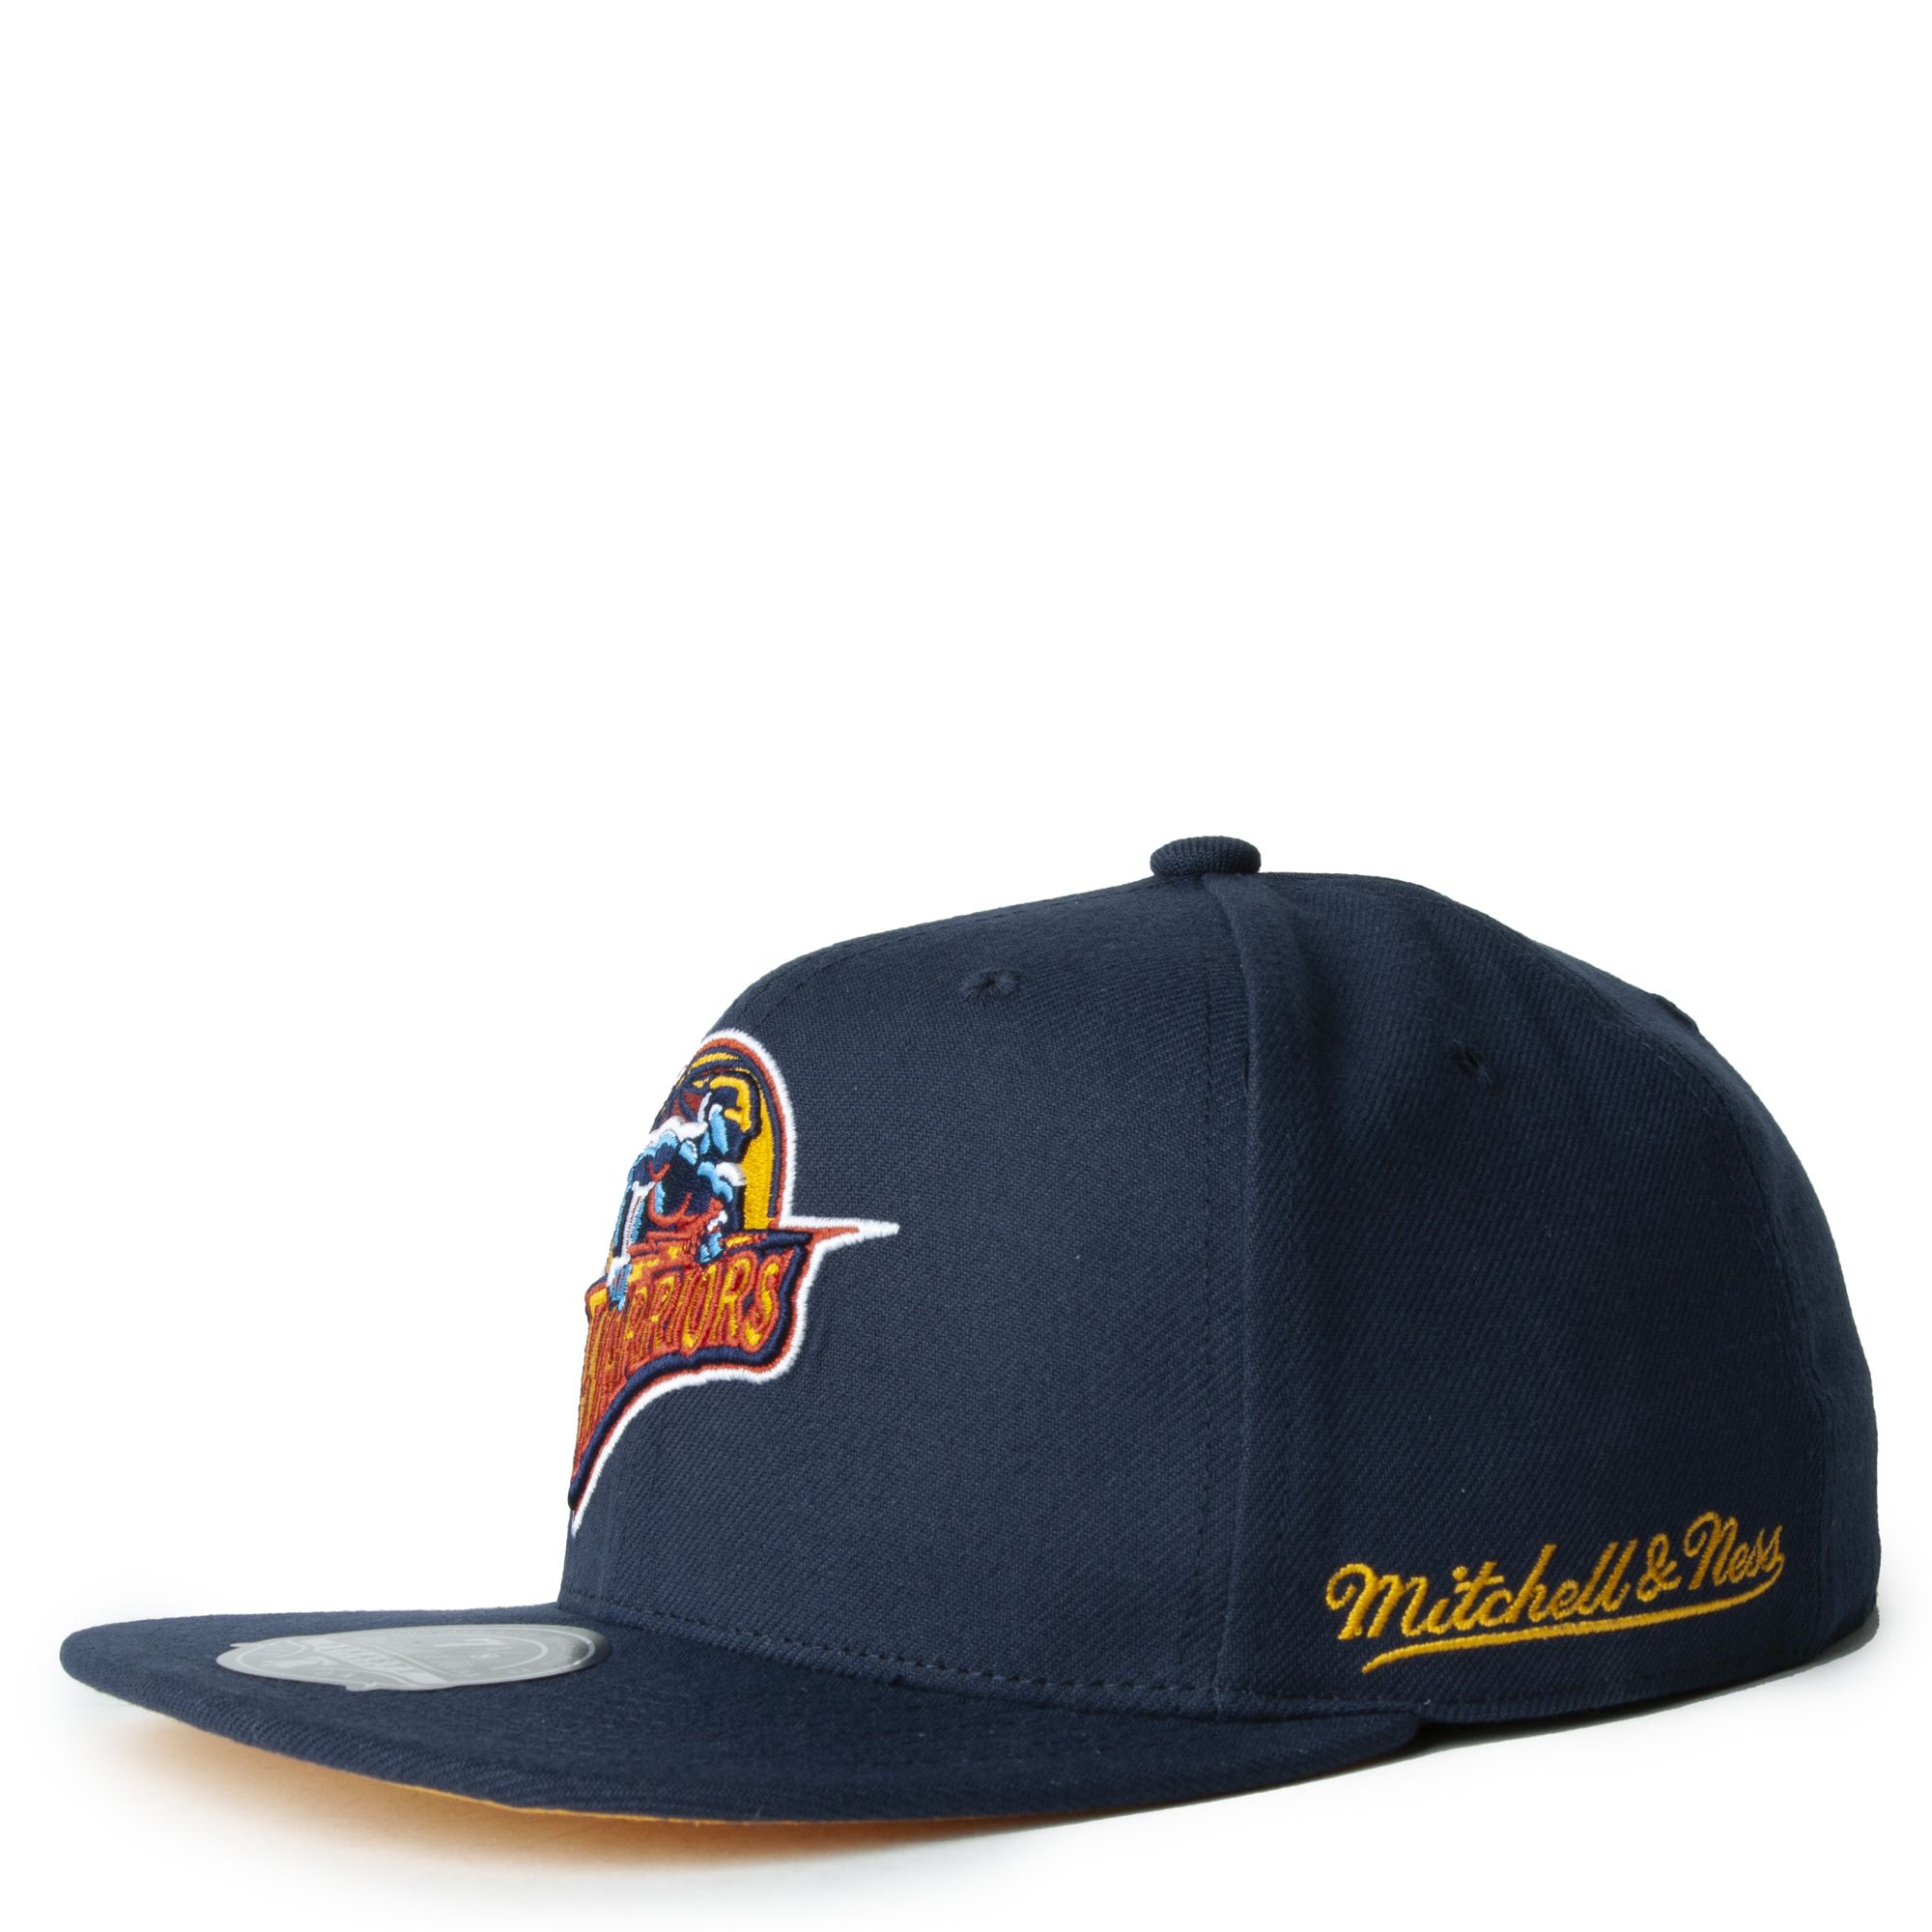 WOOL 2 TONE CLASSIC RED SNAPBACK HWC GOLDEN STATE WARRIORS - SBL